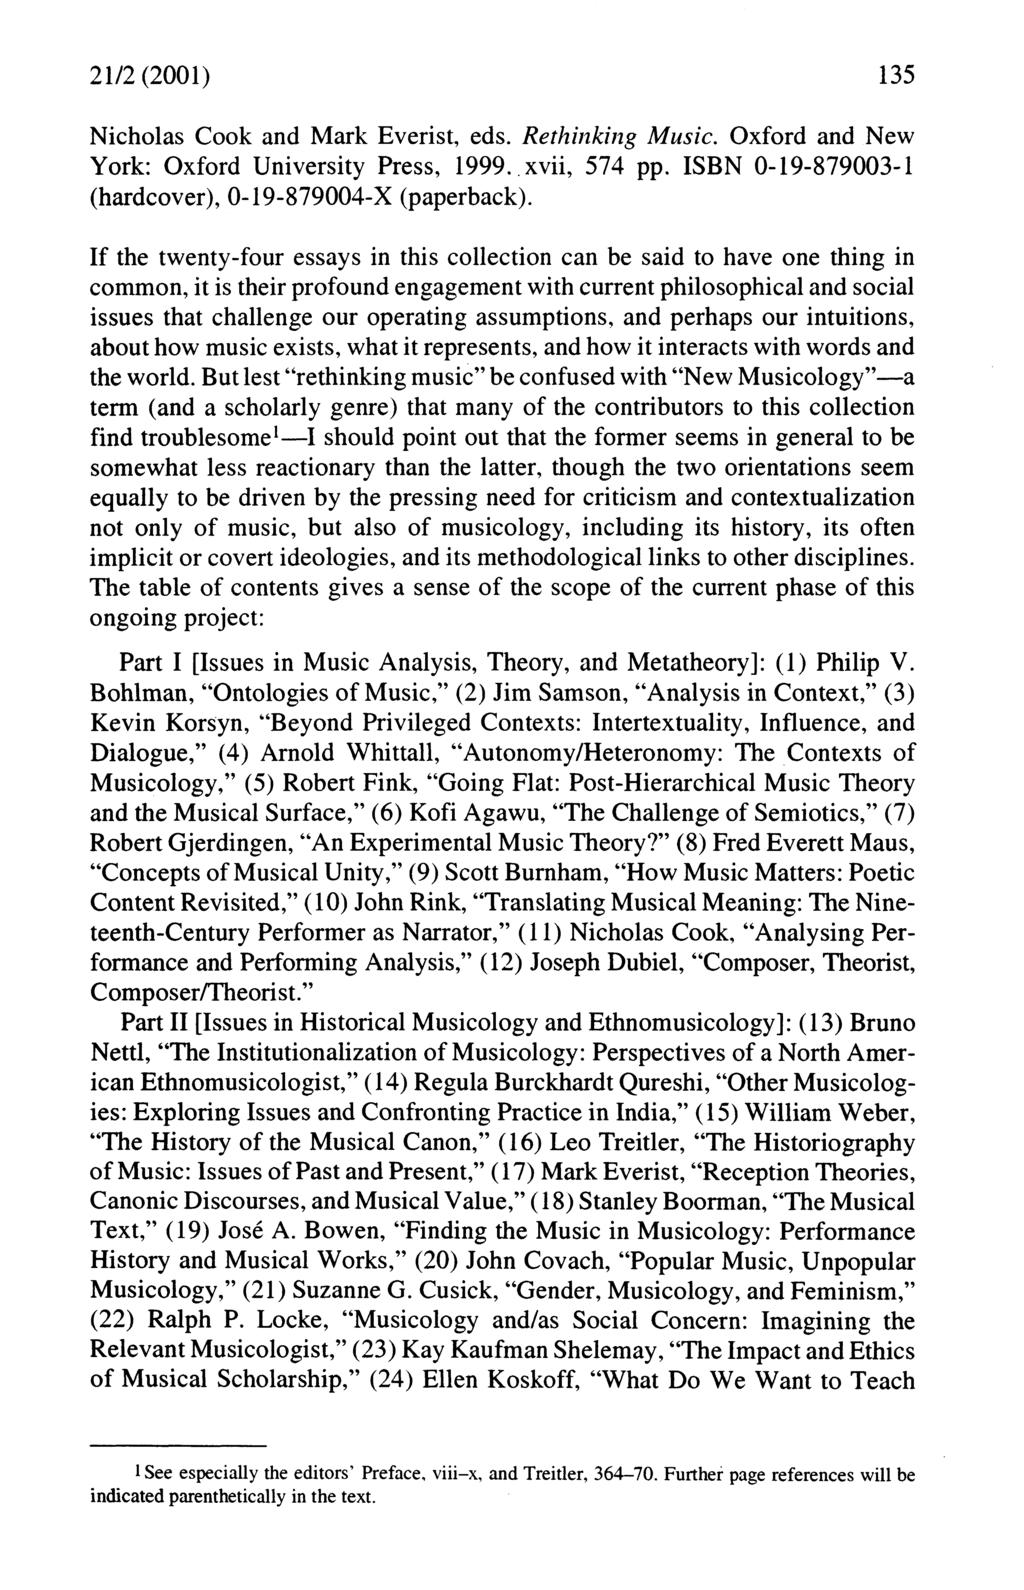 21/2(2001) 135 Nicholas Cook and Mark Everist, eds. Rethinking Music. Oxford and New York: Oxford University Press, 1999. xvii, 574 pp. ISBN 0-19-879003-1 (hardcover), 0-19-879004-X (paperback).